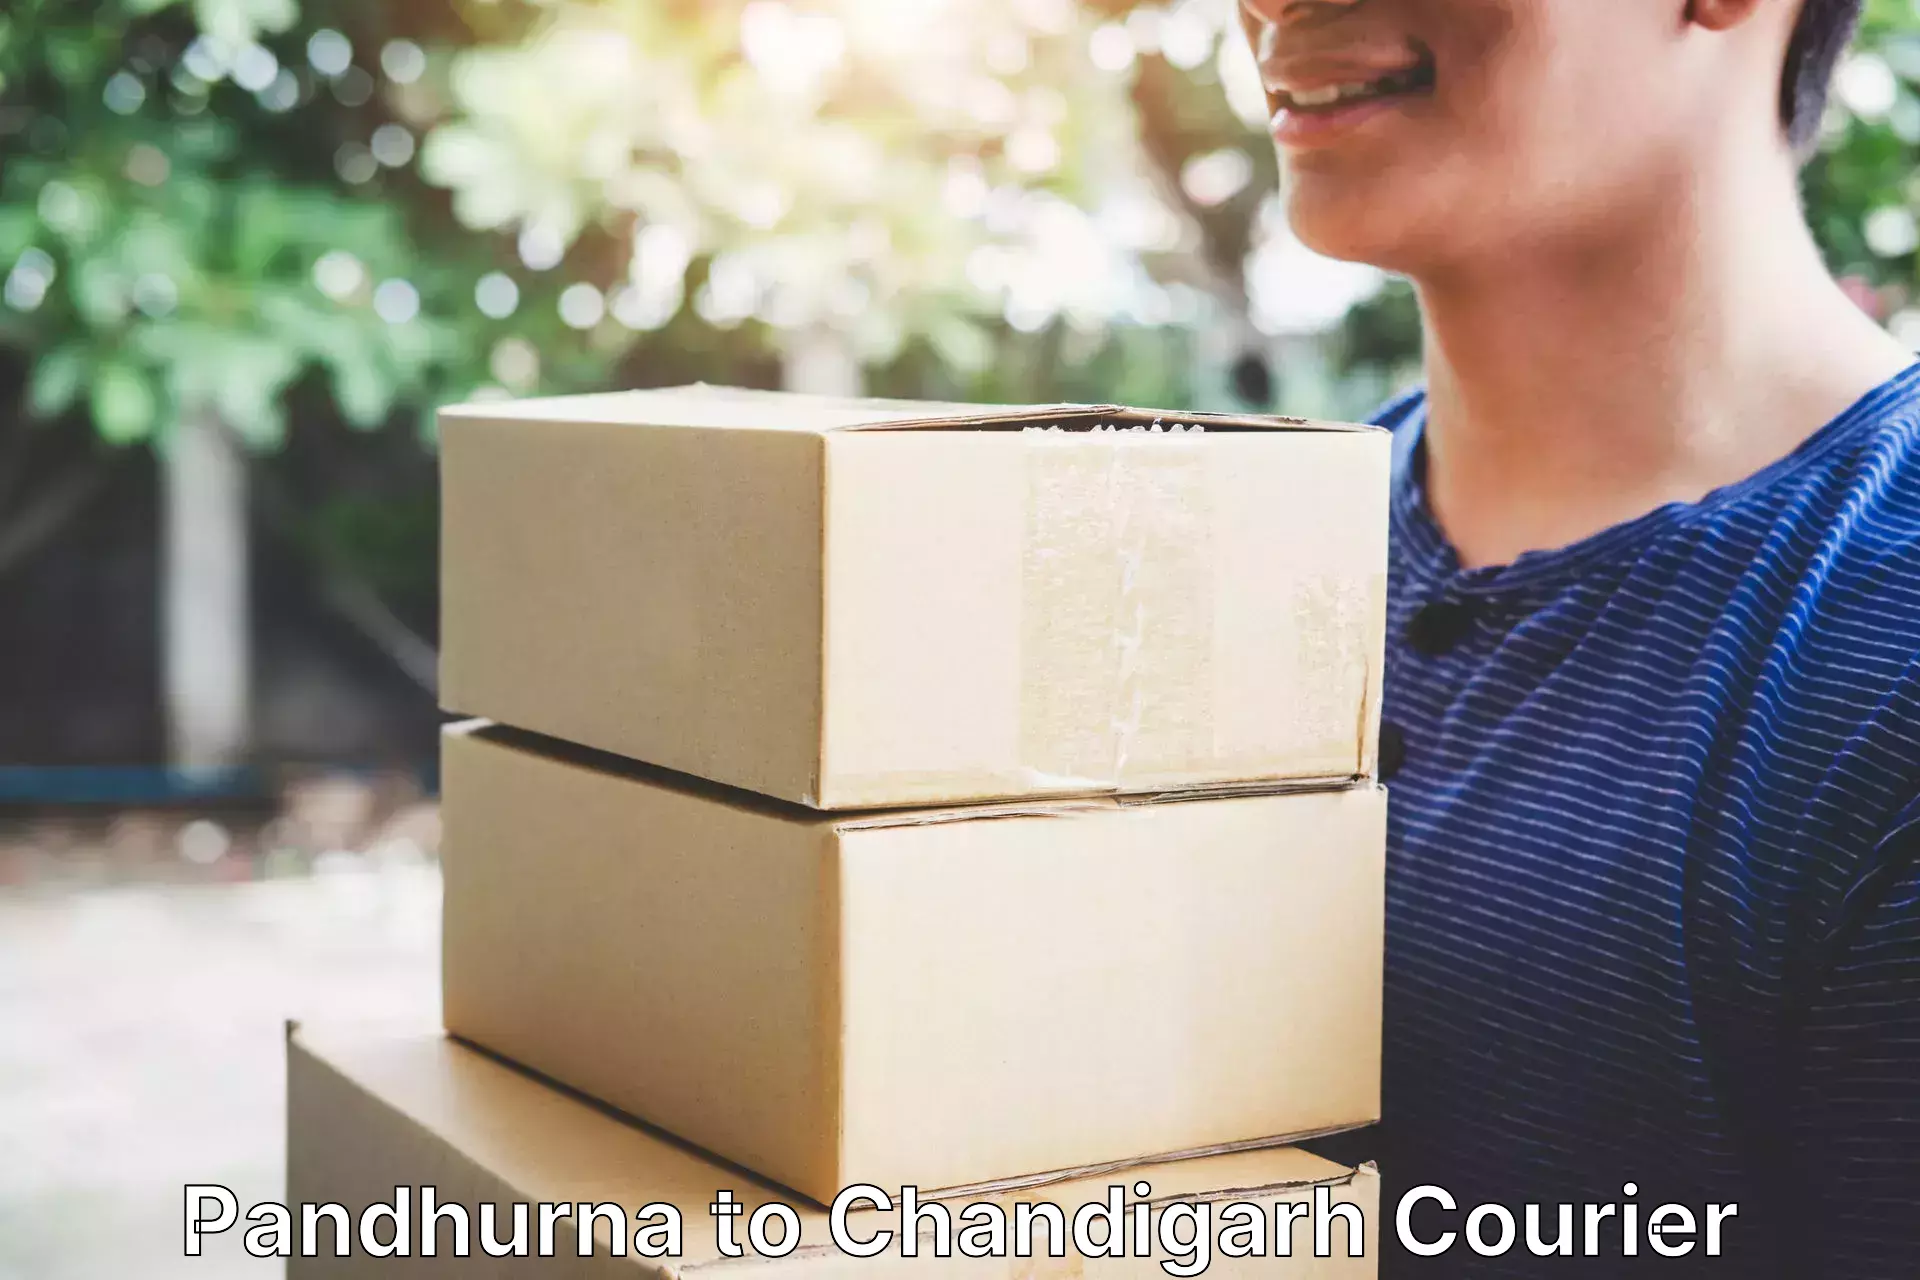 24-hour courier service Pandhurna to Chandigarh